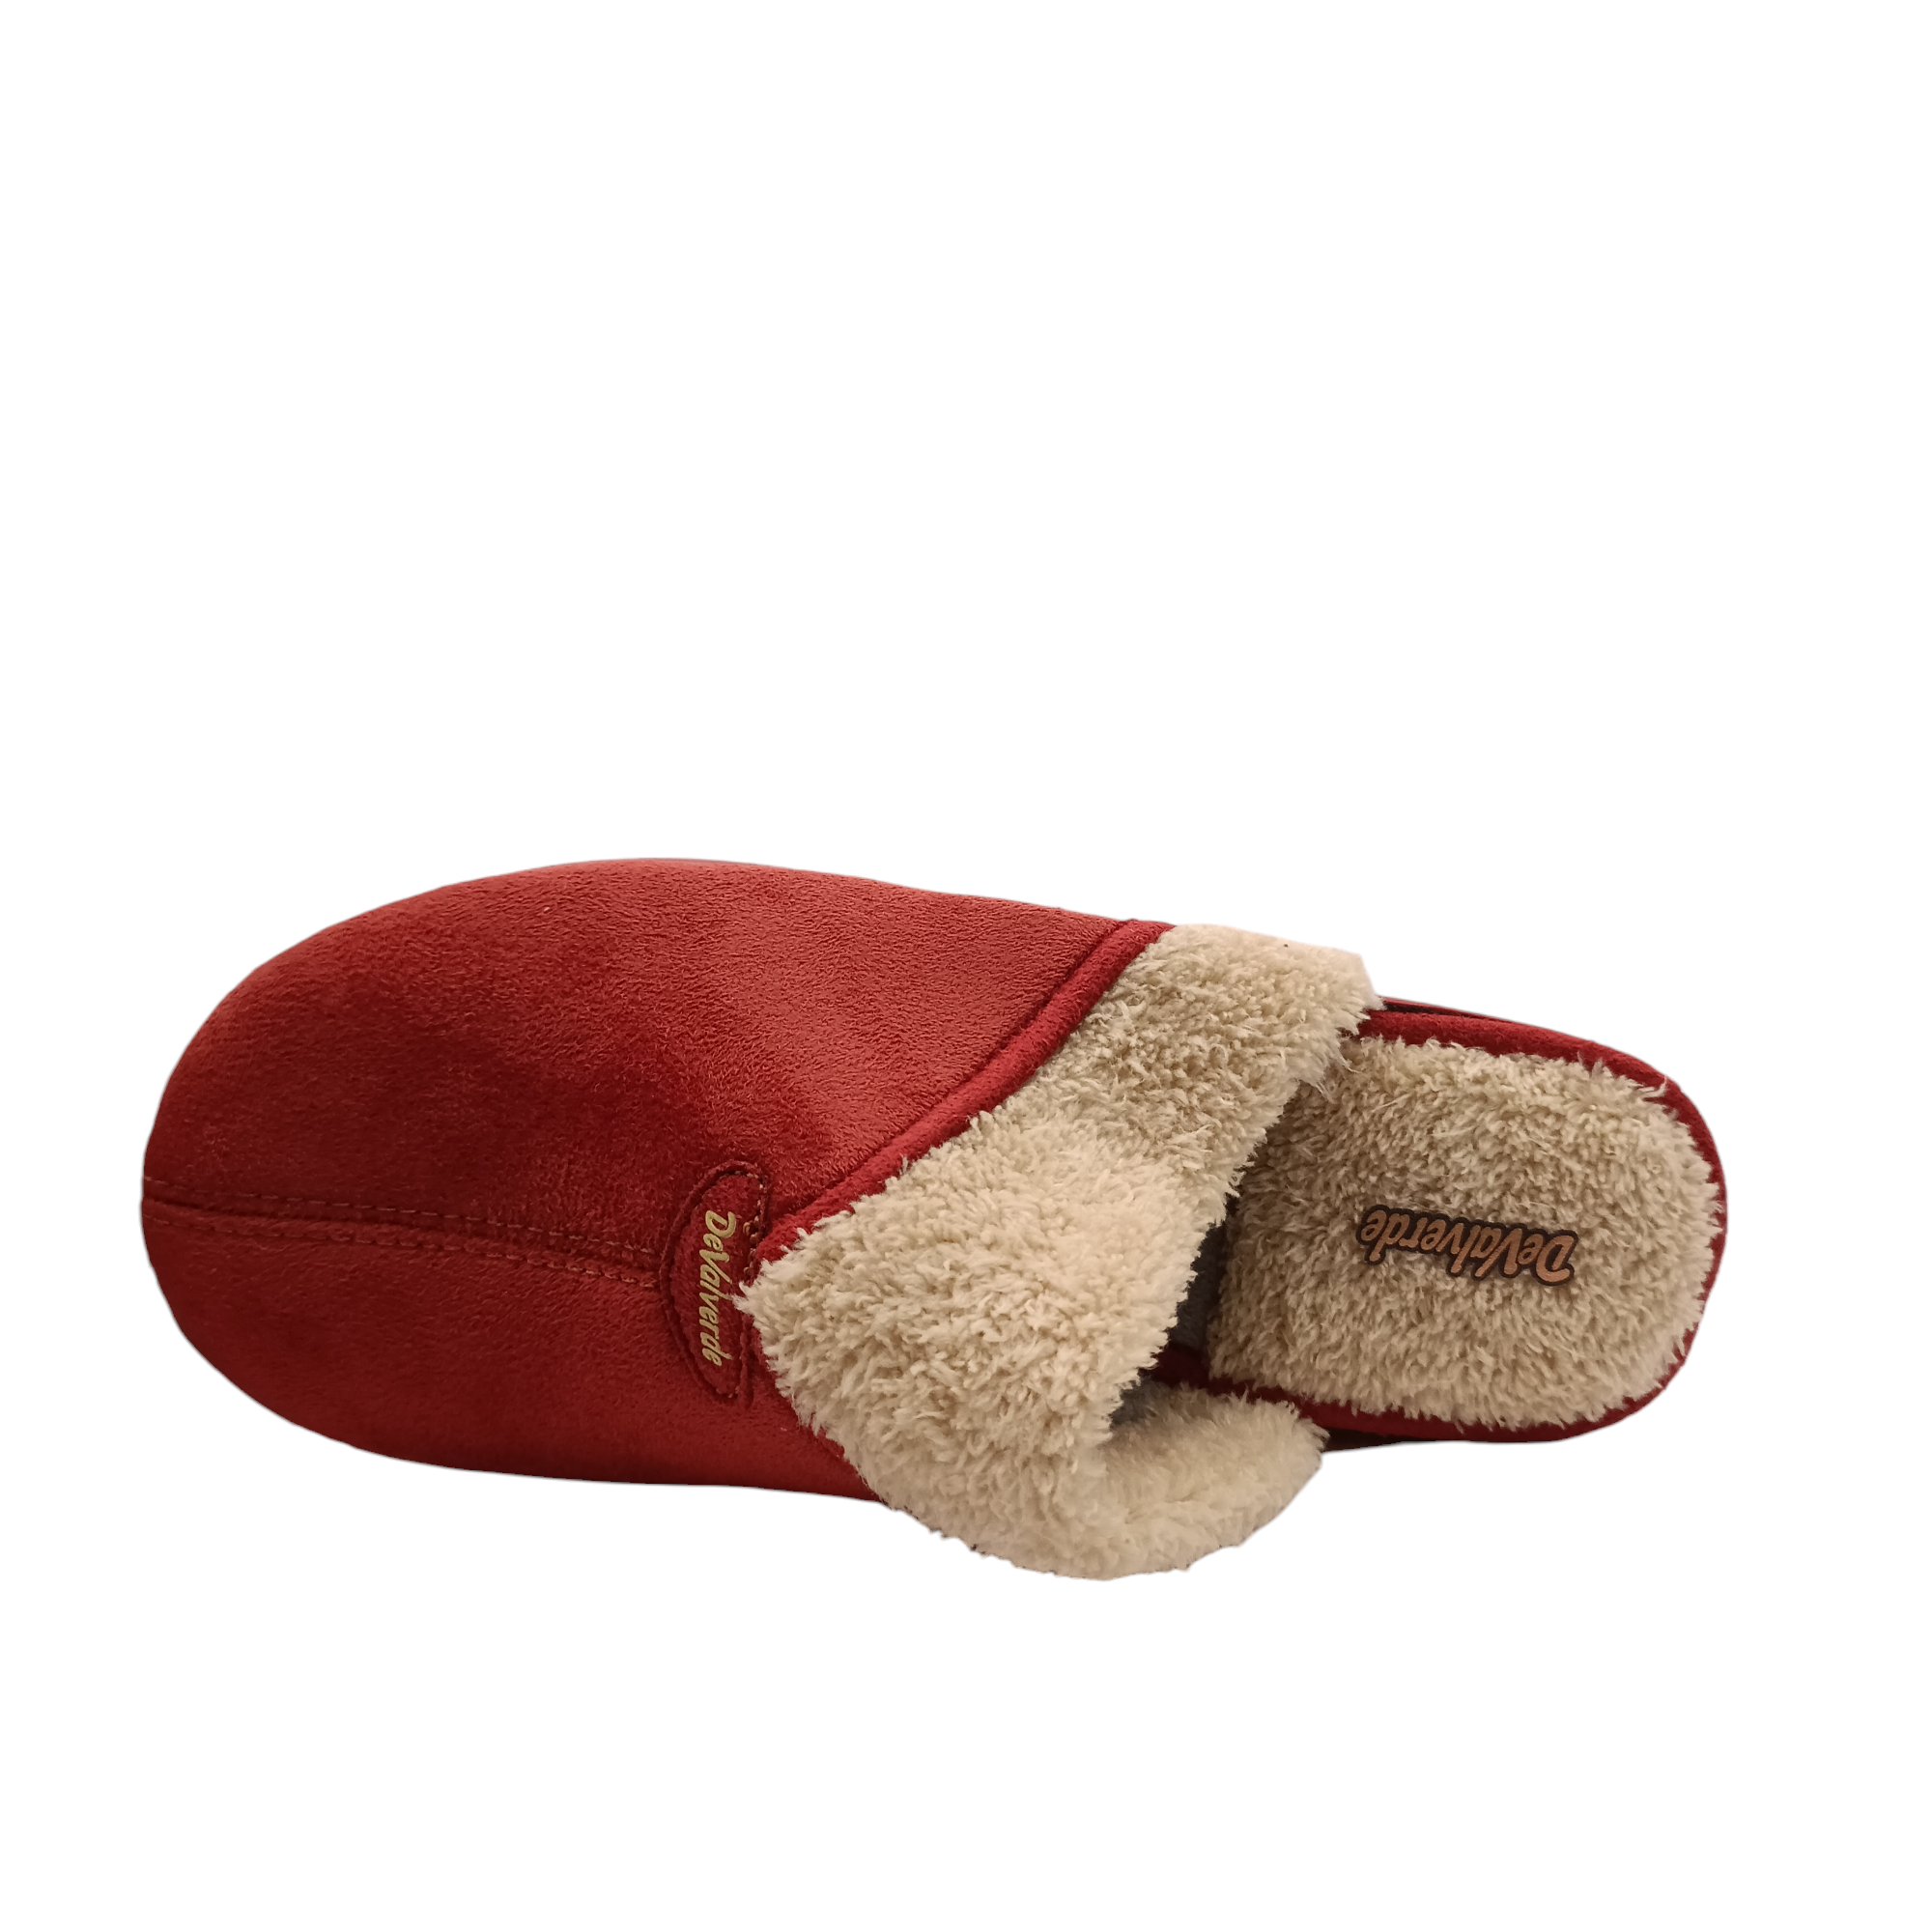 Shop Comfy DeValverde - with shoe&amp;me - from DeValverde - Slippers - Slipper, Winter, Womens - [collection]